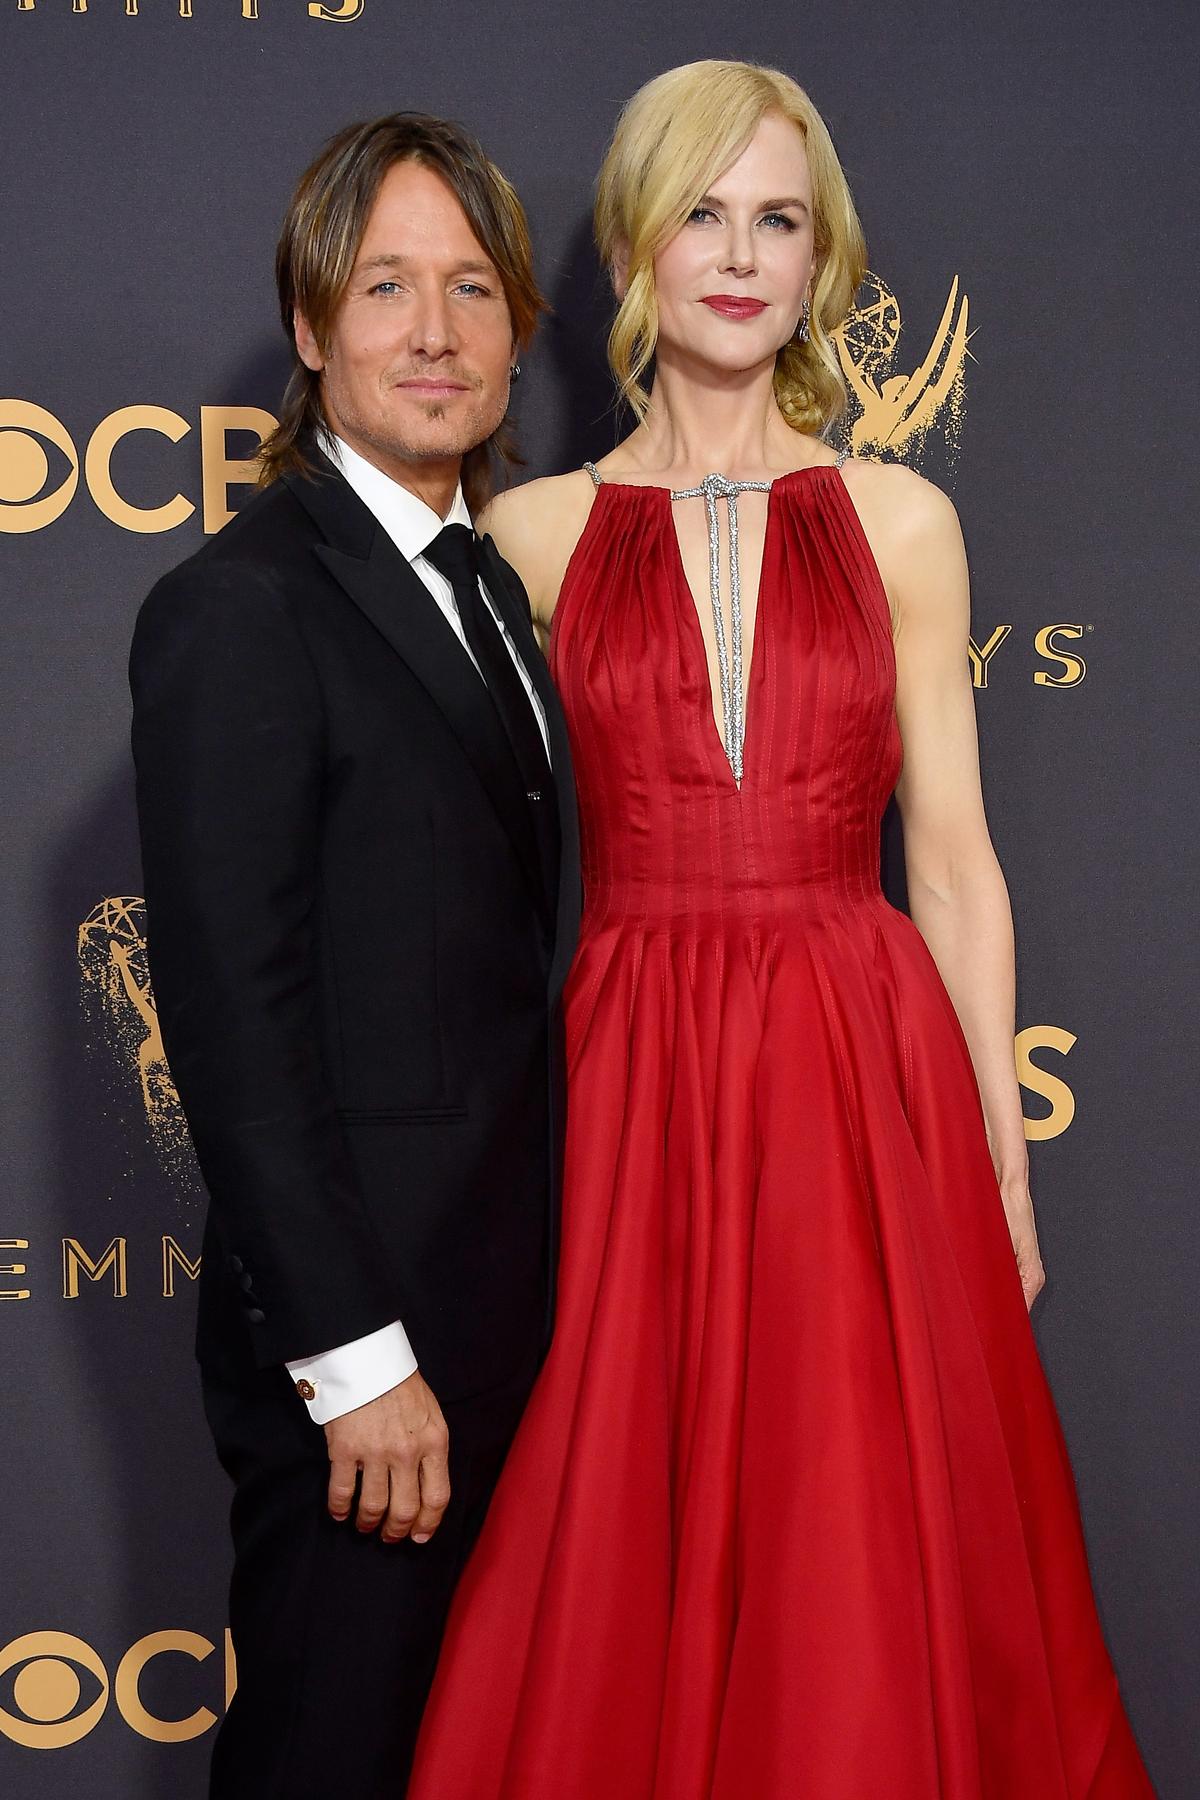 Keith Urban and Nicole Kidman at the 2017 Emmy Awards (©Getty Images | <a href="https://www.gettyimages.com/detail/news-photo/musician-keith-urban-and-actor-nicole-kidman-attend-the-news-photo/848609542?adppopup=true">Frazer Harrison</a>)